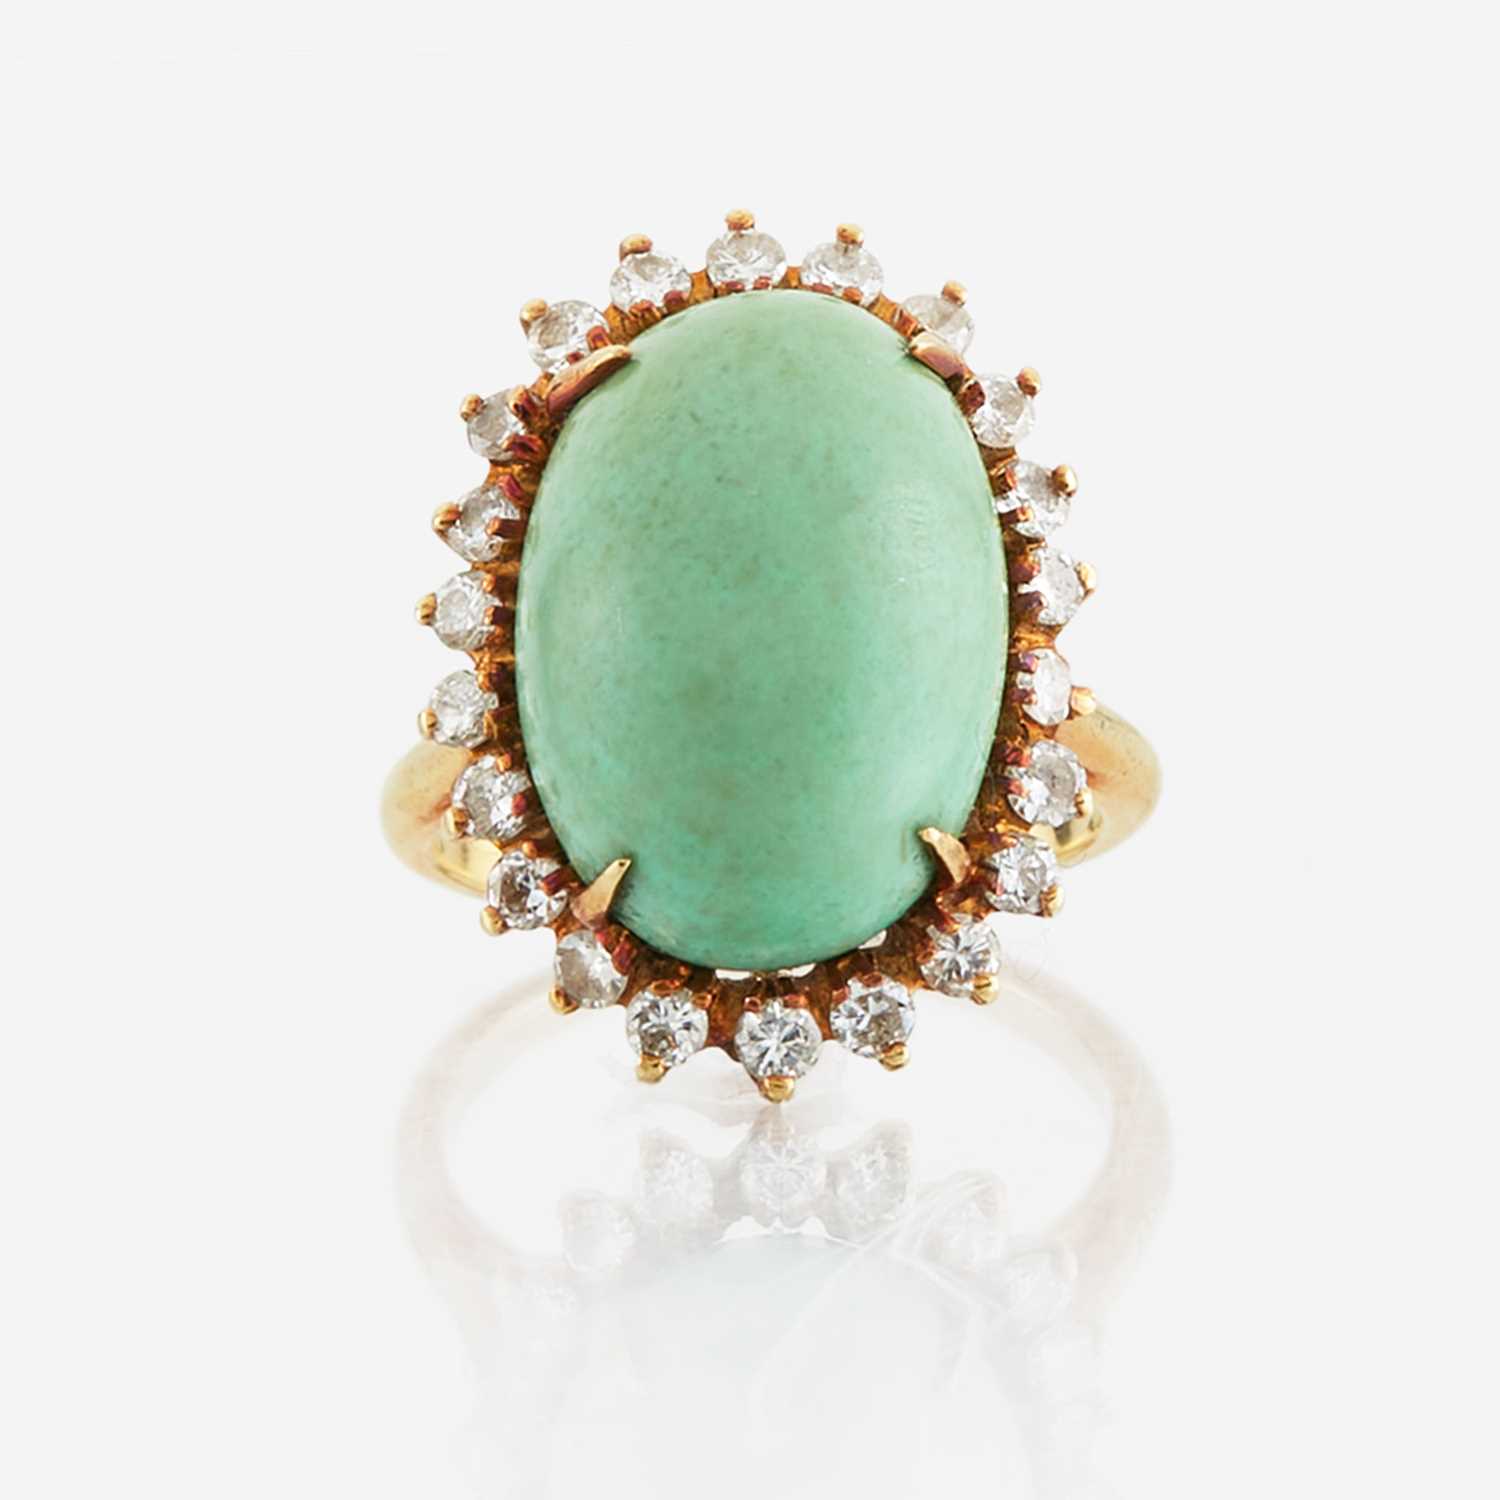 Lot 60 - A turquoise, diamond, and gold ring